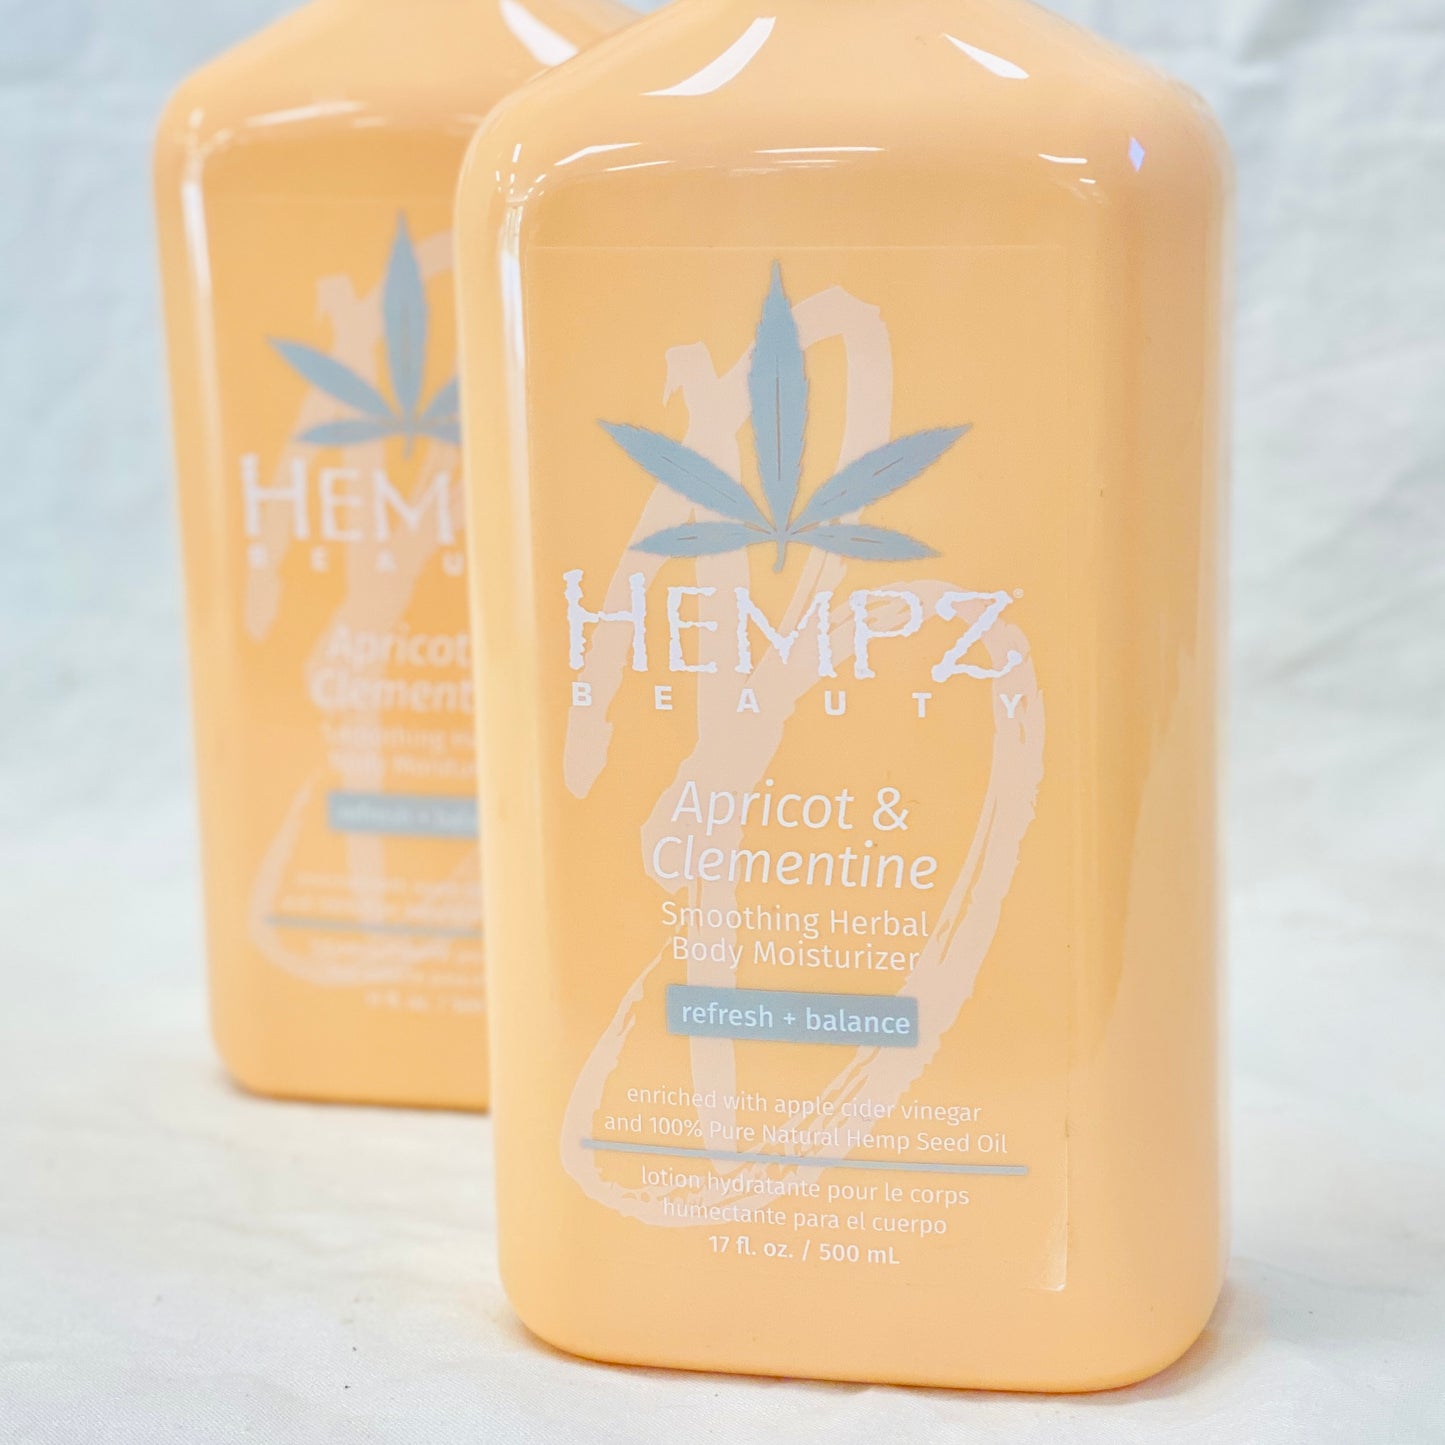 Enriched with 100% Pure Natural Hemp Seed Oil Paraben-Free, Gluten-Free, Cruelty-Free, 100% Vegan, Dye-Free, THC-Free Fragrance: Apricot & Clementine